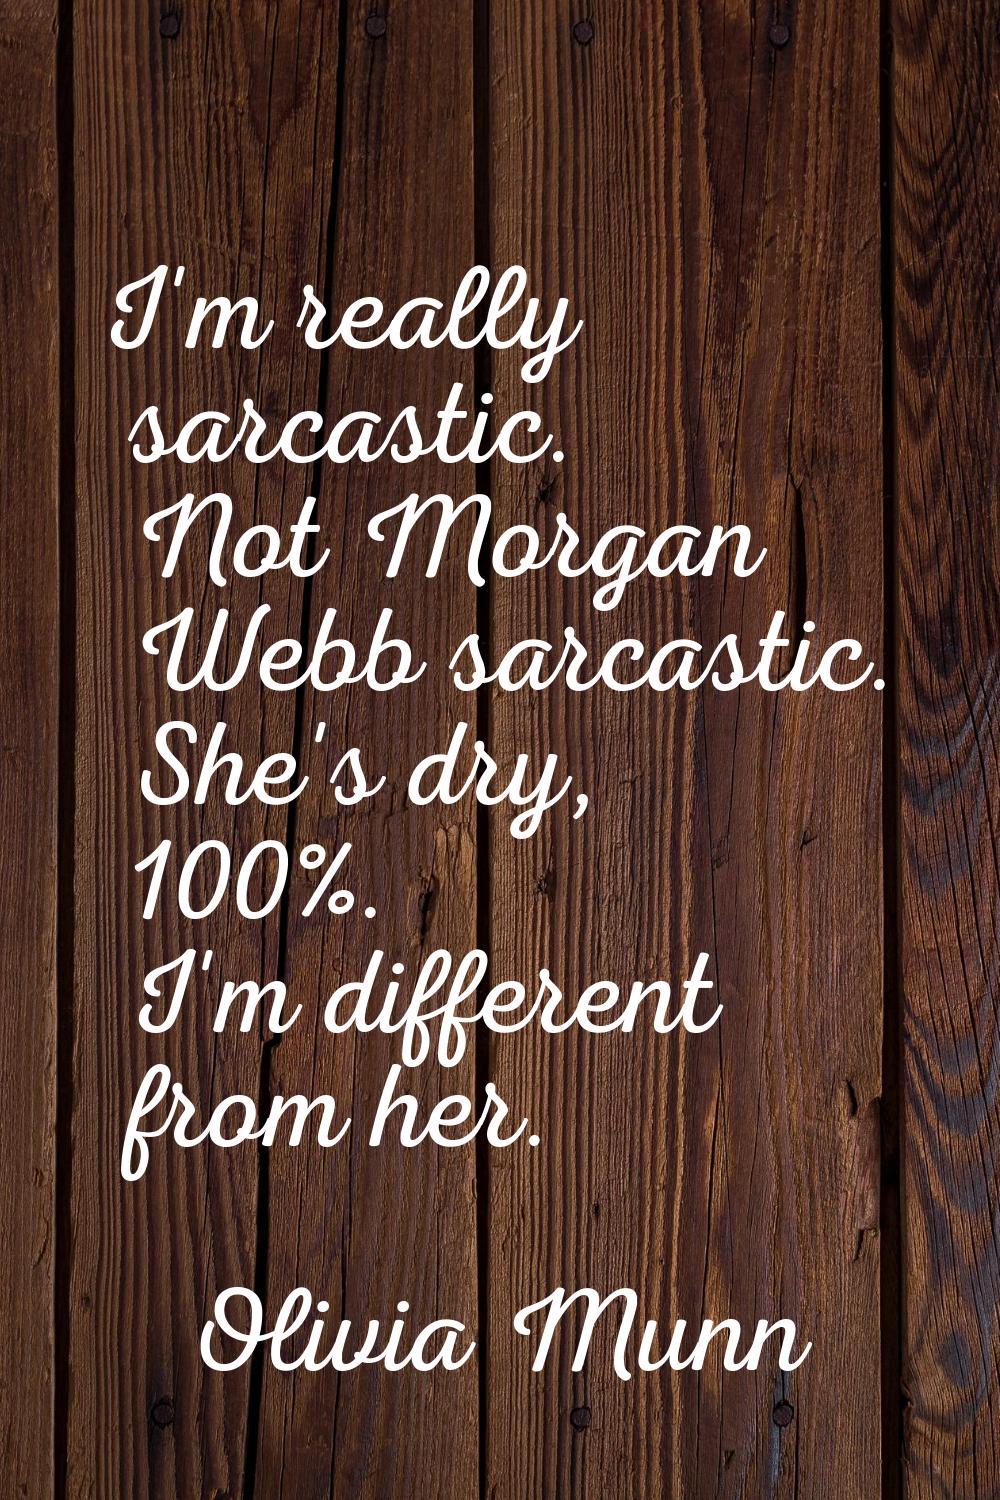 I'm really sarcastic. Not Morgan Webb sarcastic. She's dry, 100%. I'm different from her.